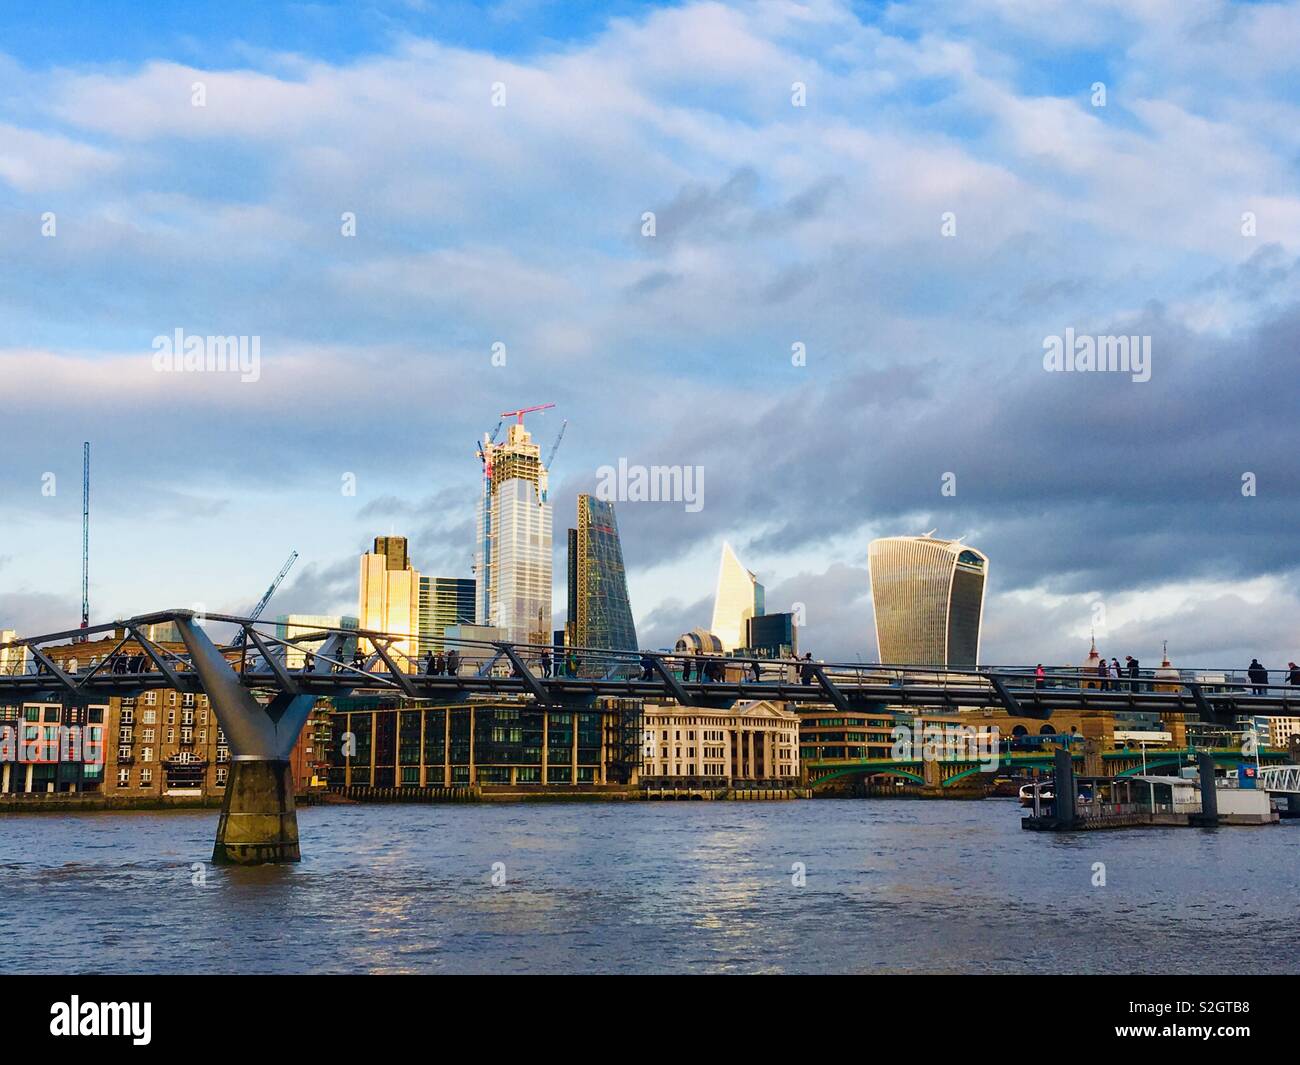 London skyline including river Thames, Millennium Bridge, Walkie Talkie building, Cheese Grater building, cranes and new building work. Stock Photo